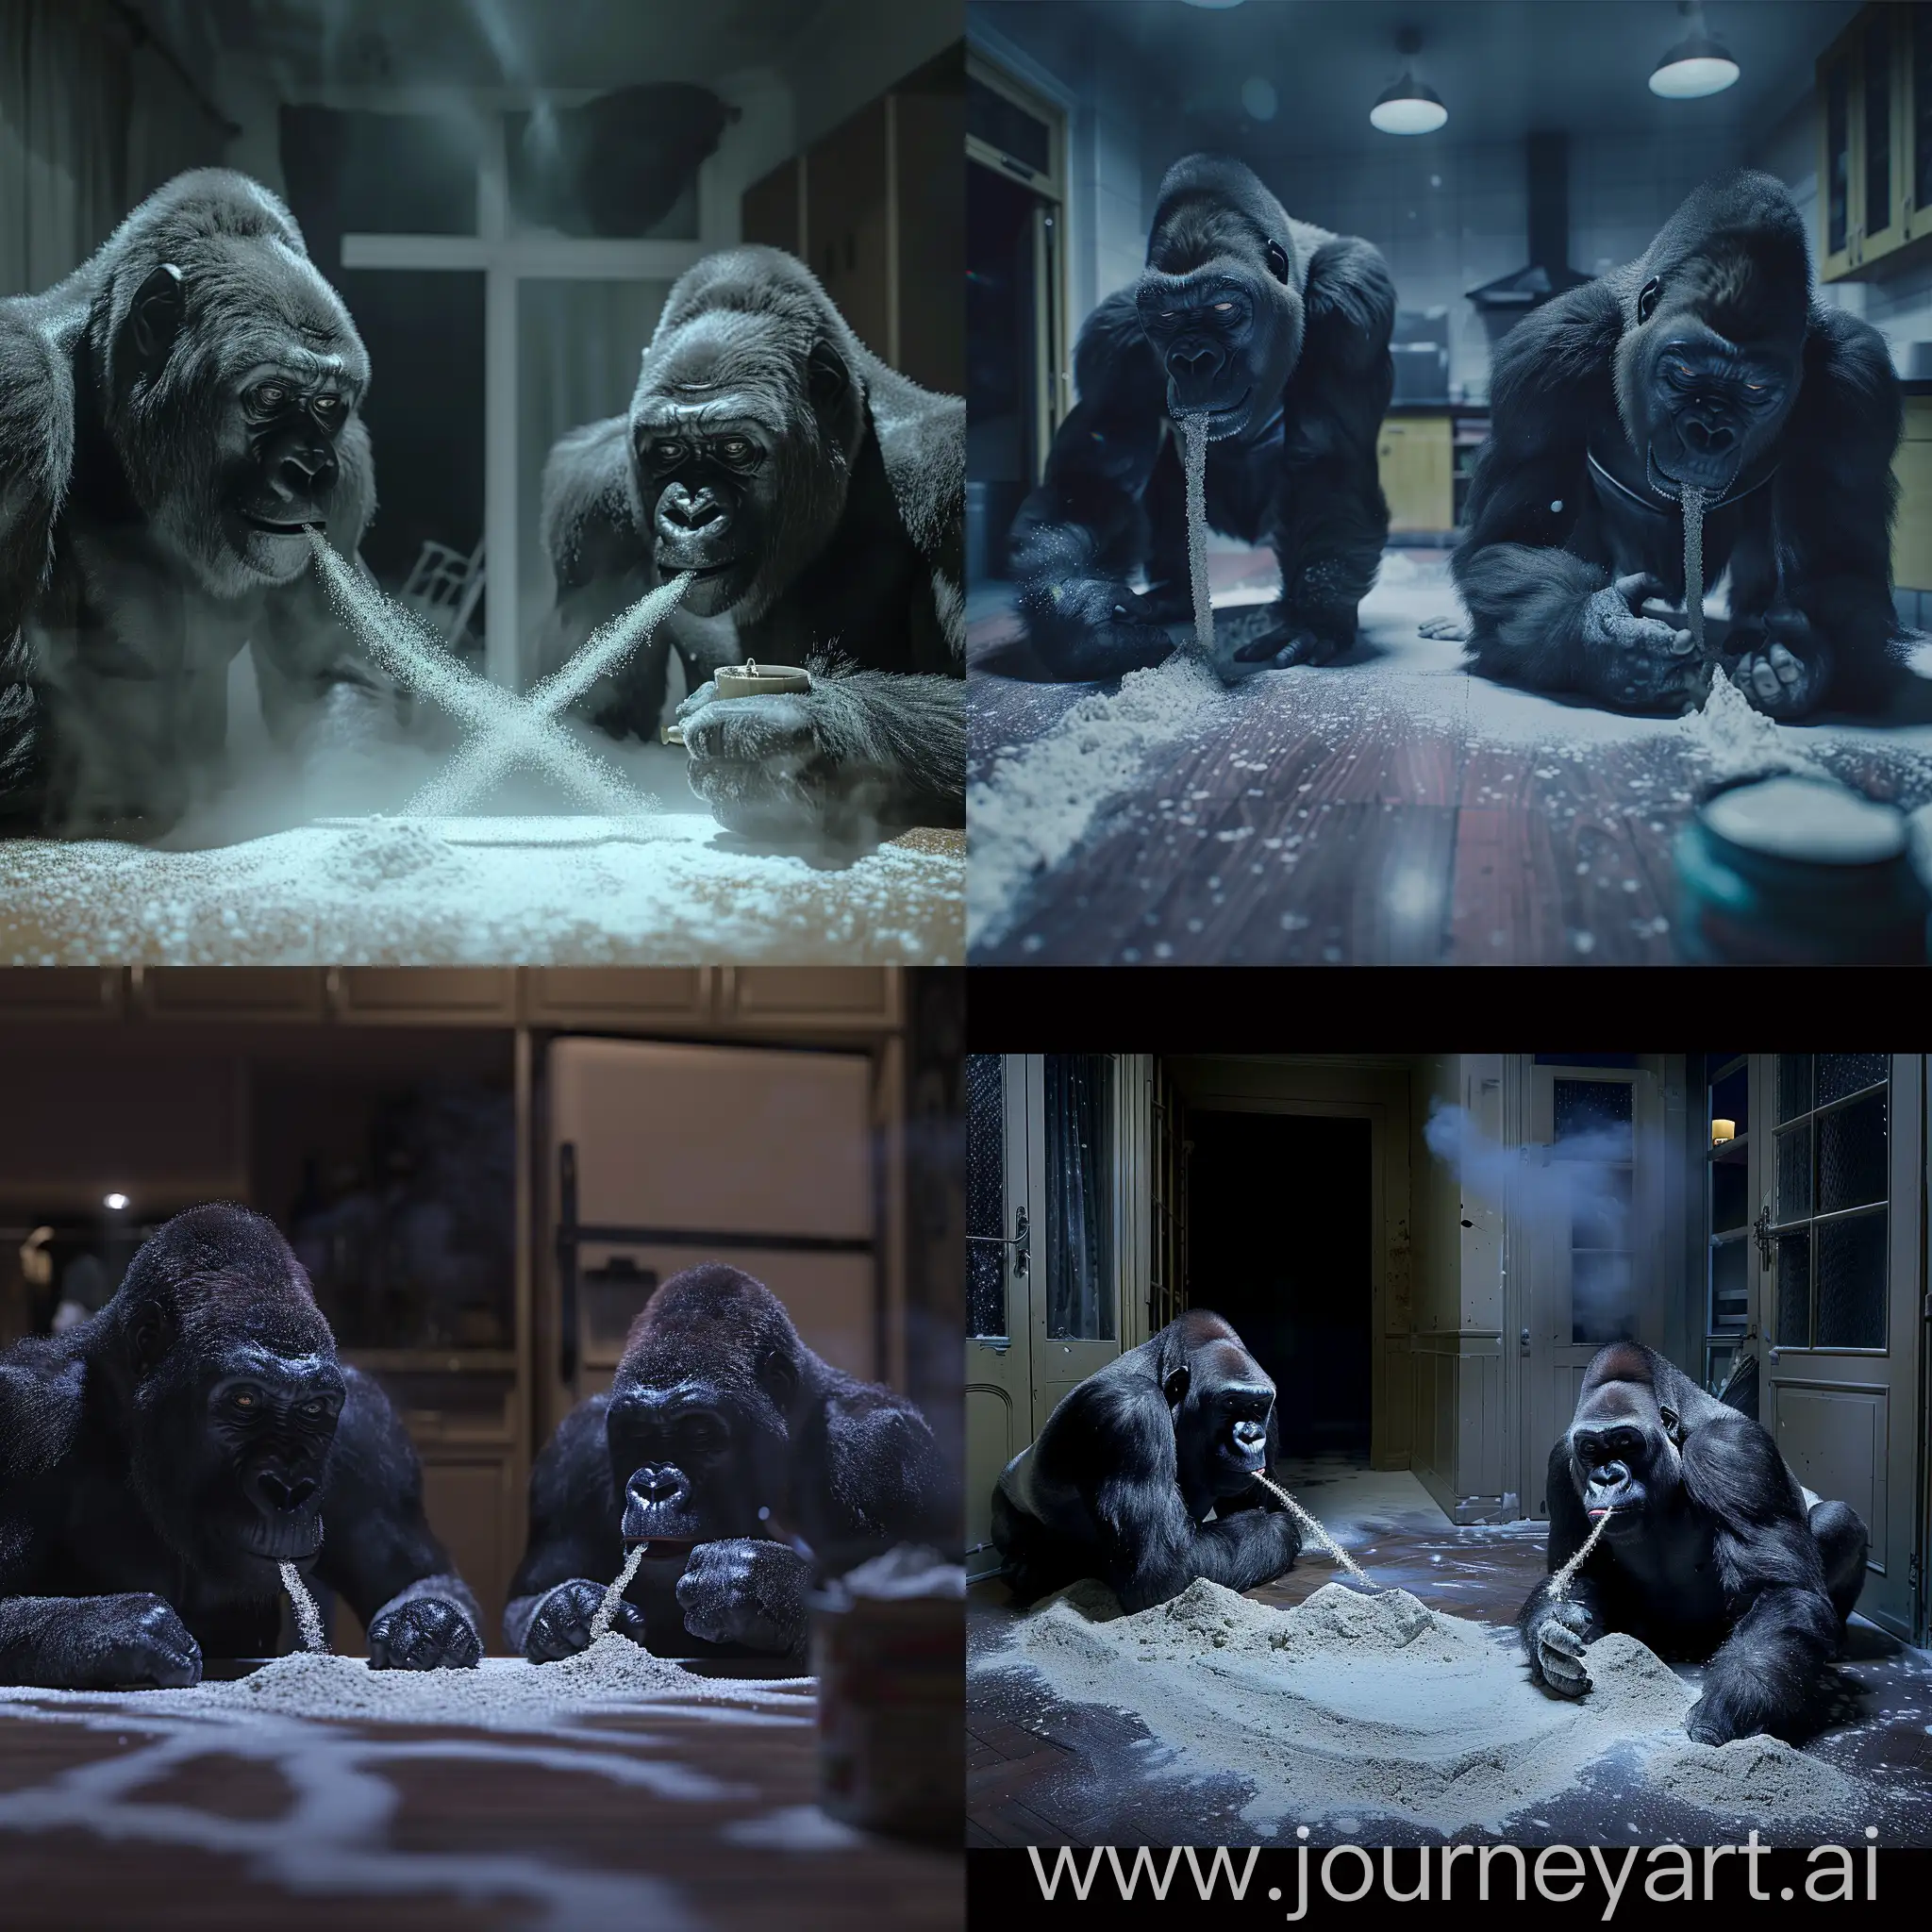 Ive walked into a room and caught 2 gorillas snorting lines of flour, realistic, night time, 4k